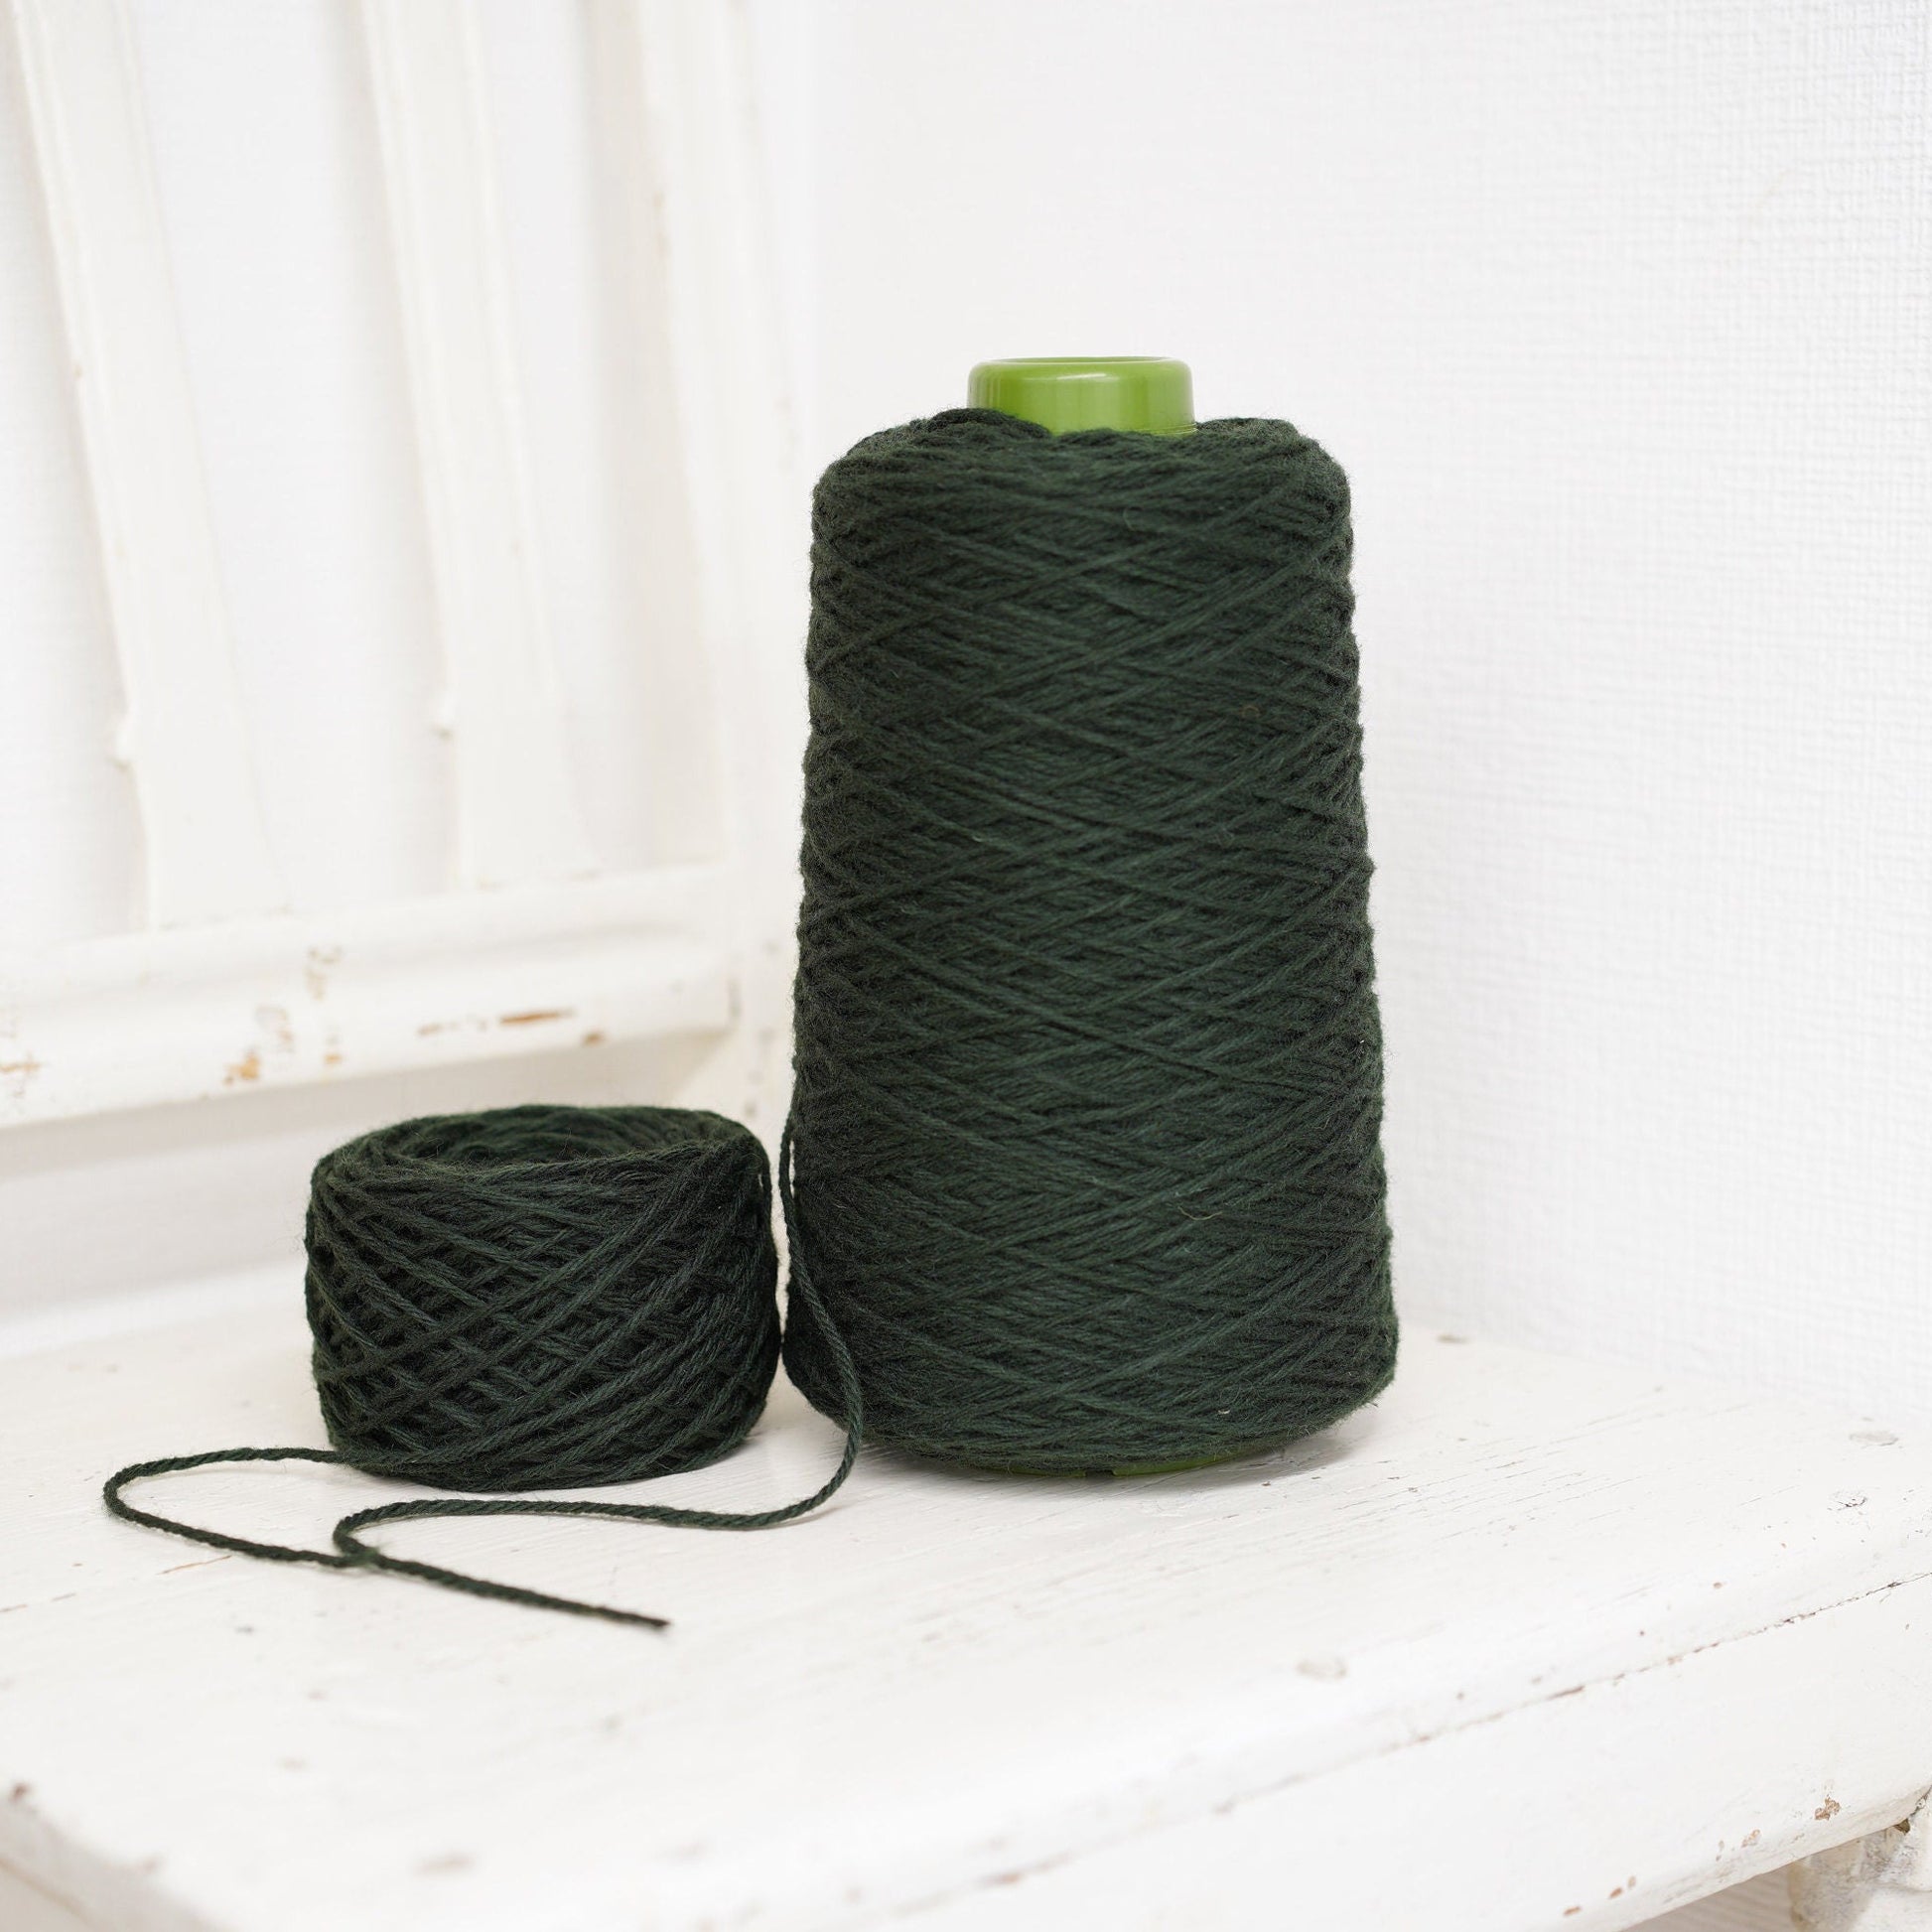 Forest green wool for knitting